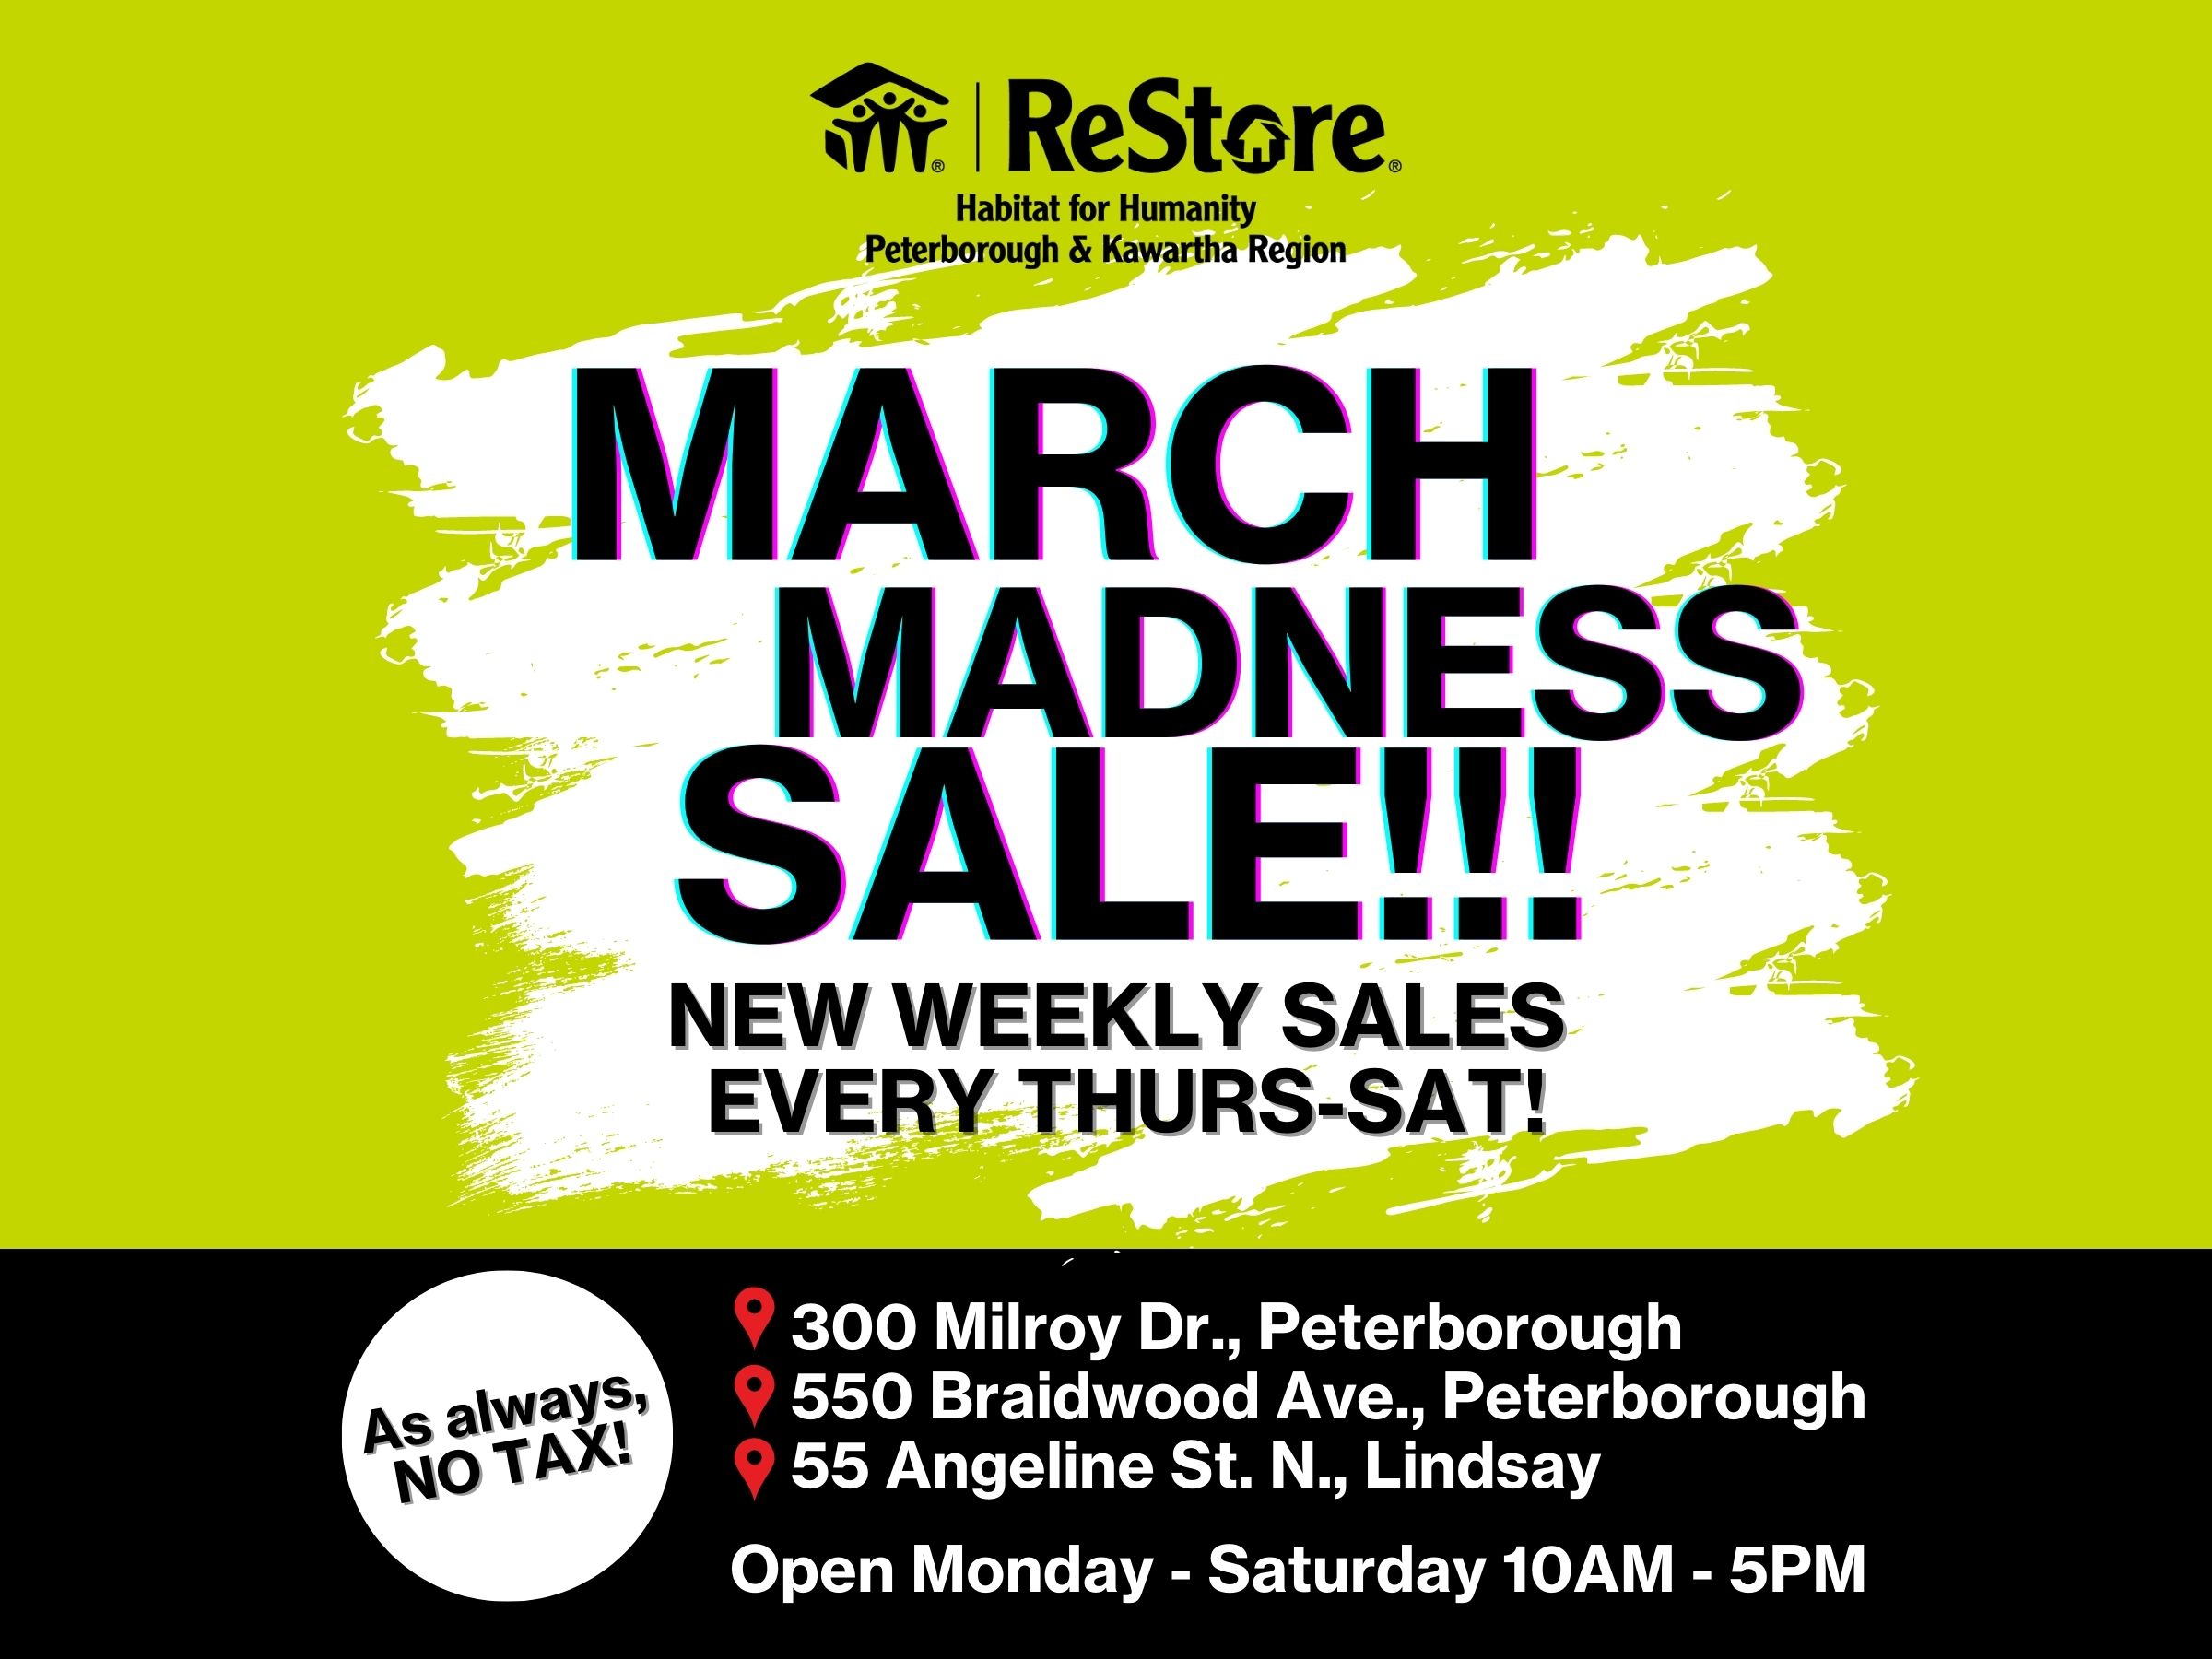 March Madness Sale New Weekly Sales every Thursday to Saturday, as always no tax. ReStores are open Mondays to Saturdays 10 am to 5pm. Visit your local ReStores 300 Milroy Drive Peterborough, 550 Braidwood Ave, Peterborough, 55 Angeline Street North Lindsay